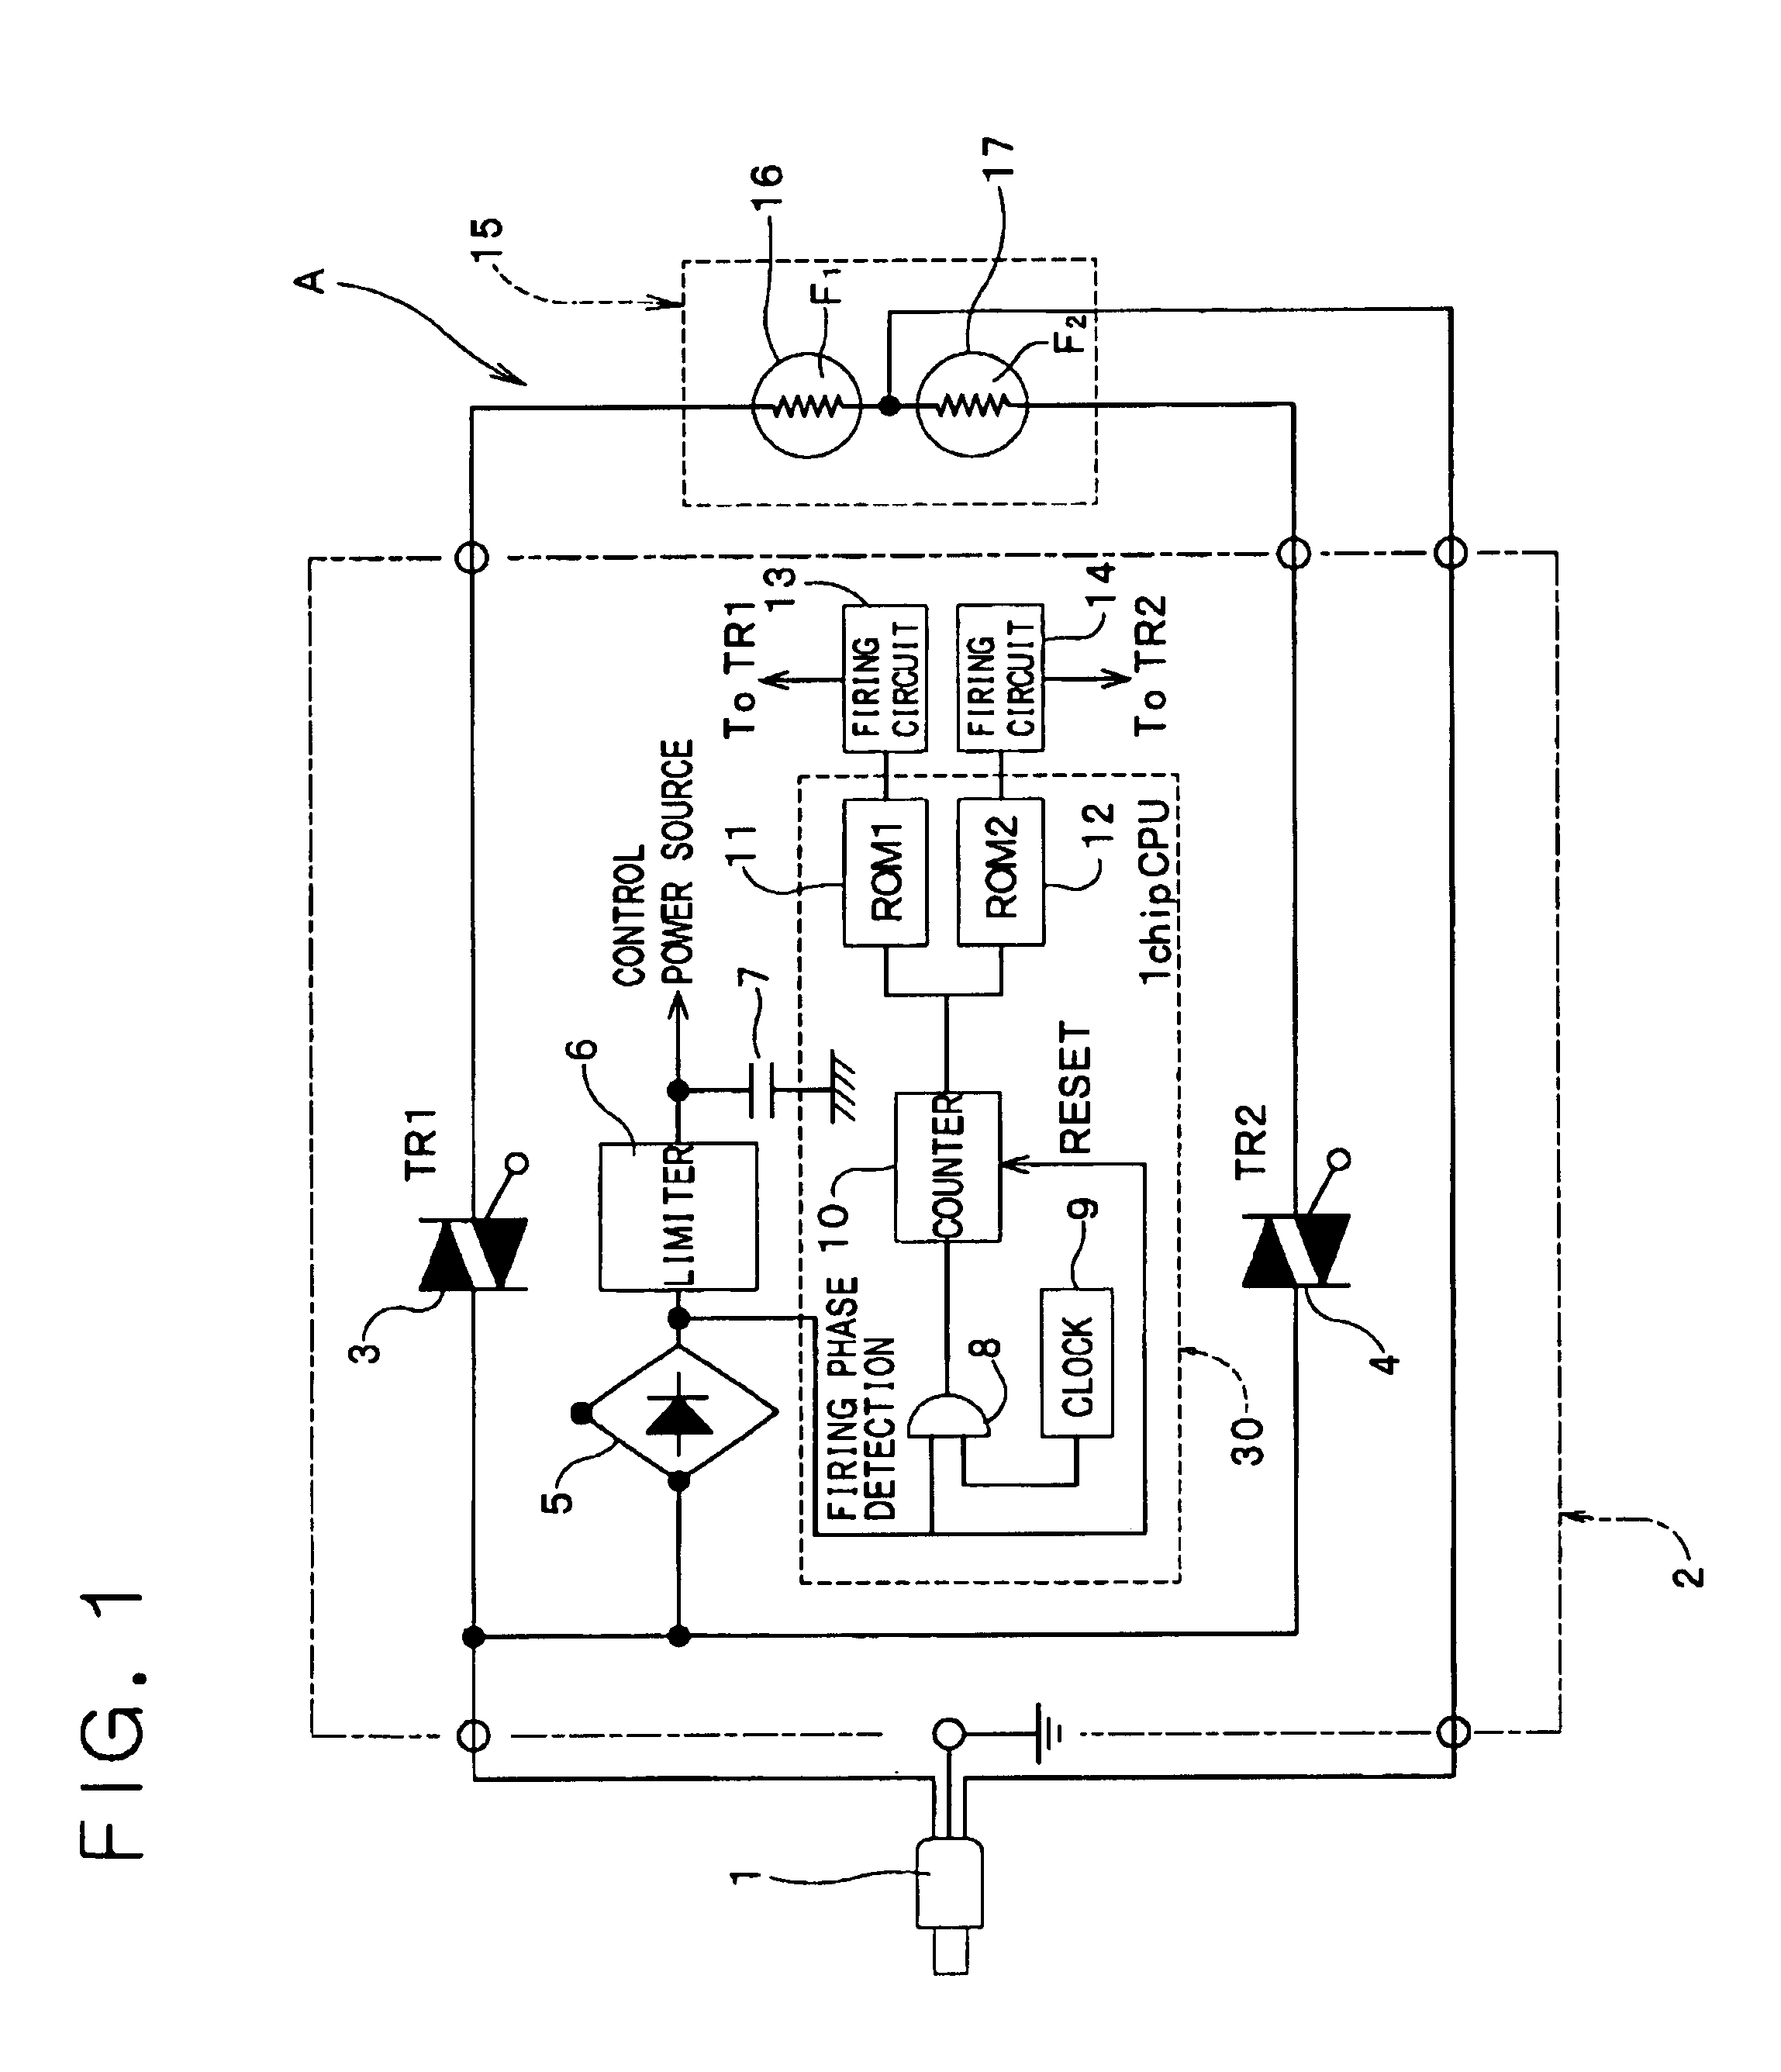 Dimming-control lighting apparatus for incandescent electric lamp